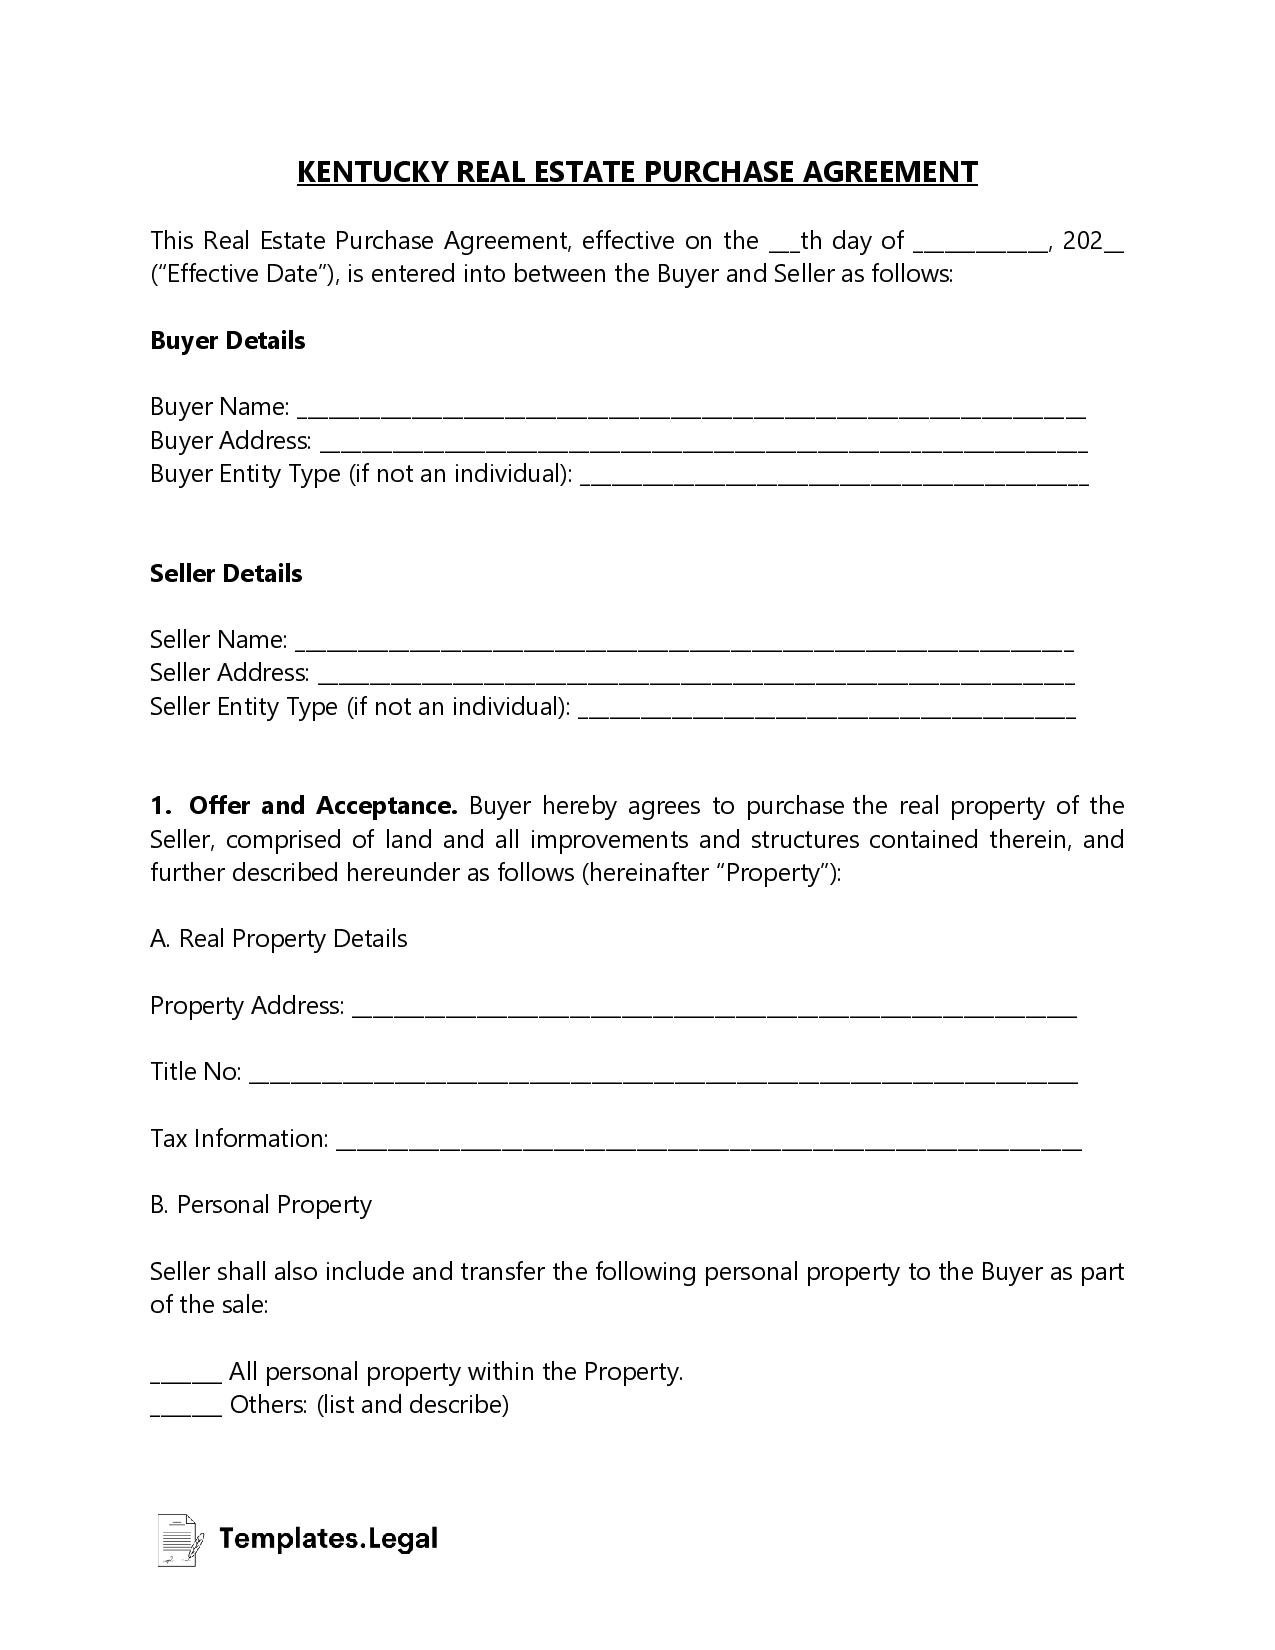 Kentucky Real Estate Purchase Agreement - Templates.Legal